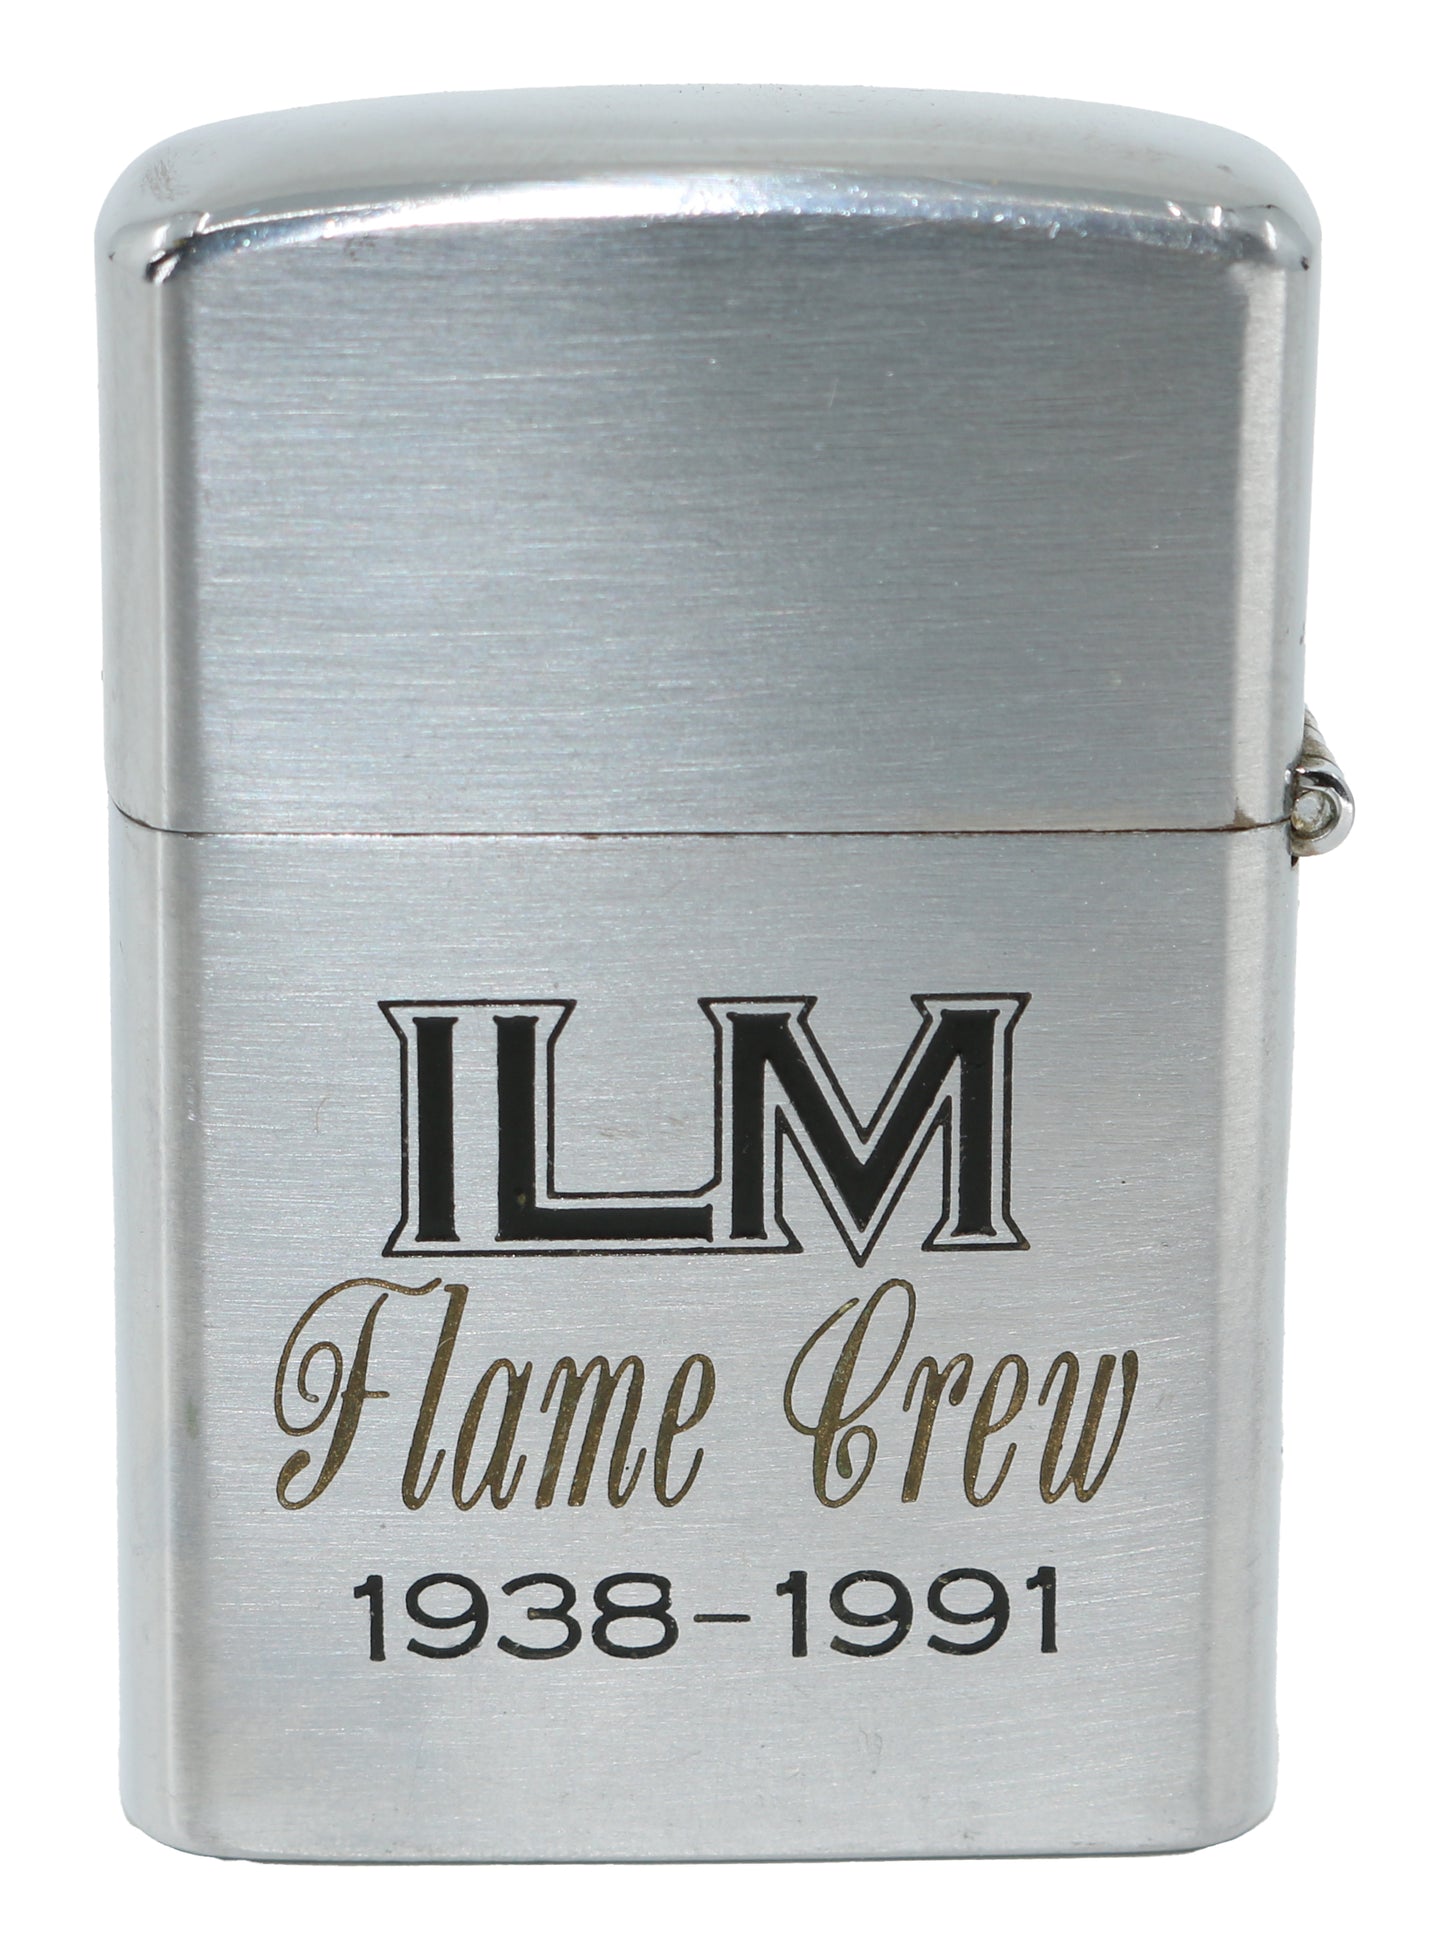 
                  
                    Wes Takahashi Industrial Light & Magic Collection - The Rocketeer ILM Flame Crew 1938 - 1991 Barlow Flint Lighter
                  
                